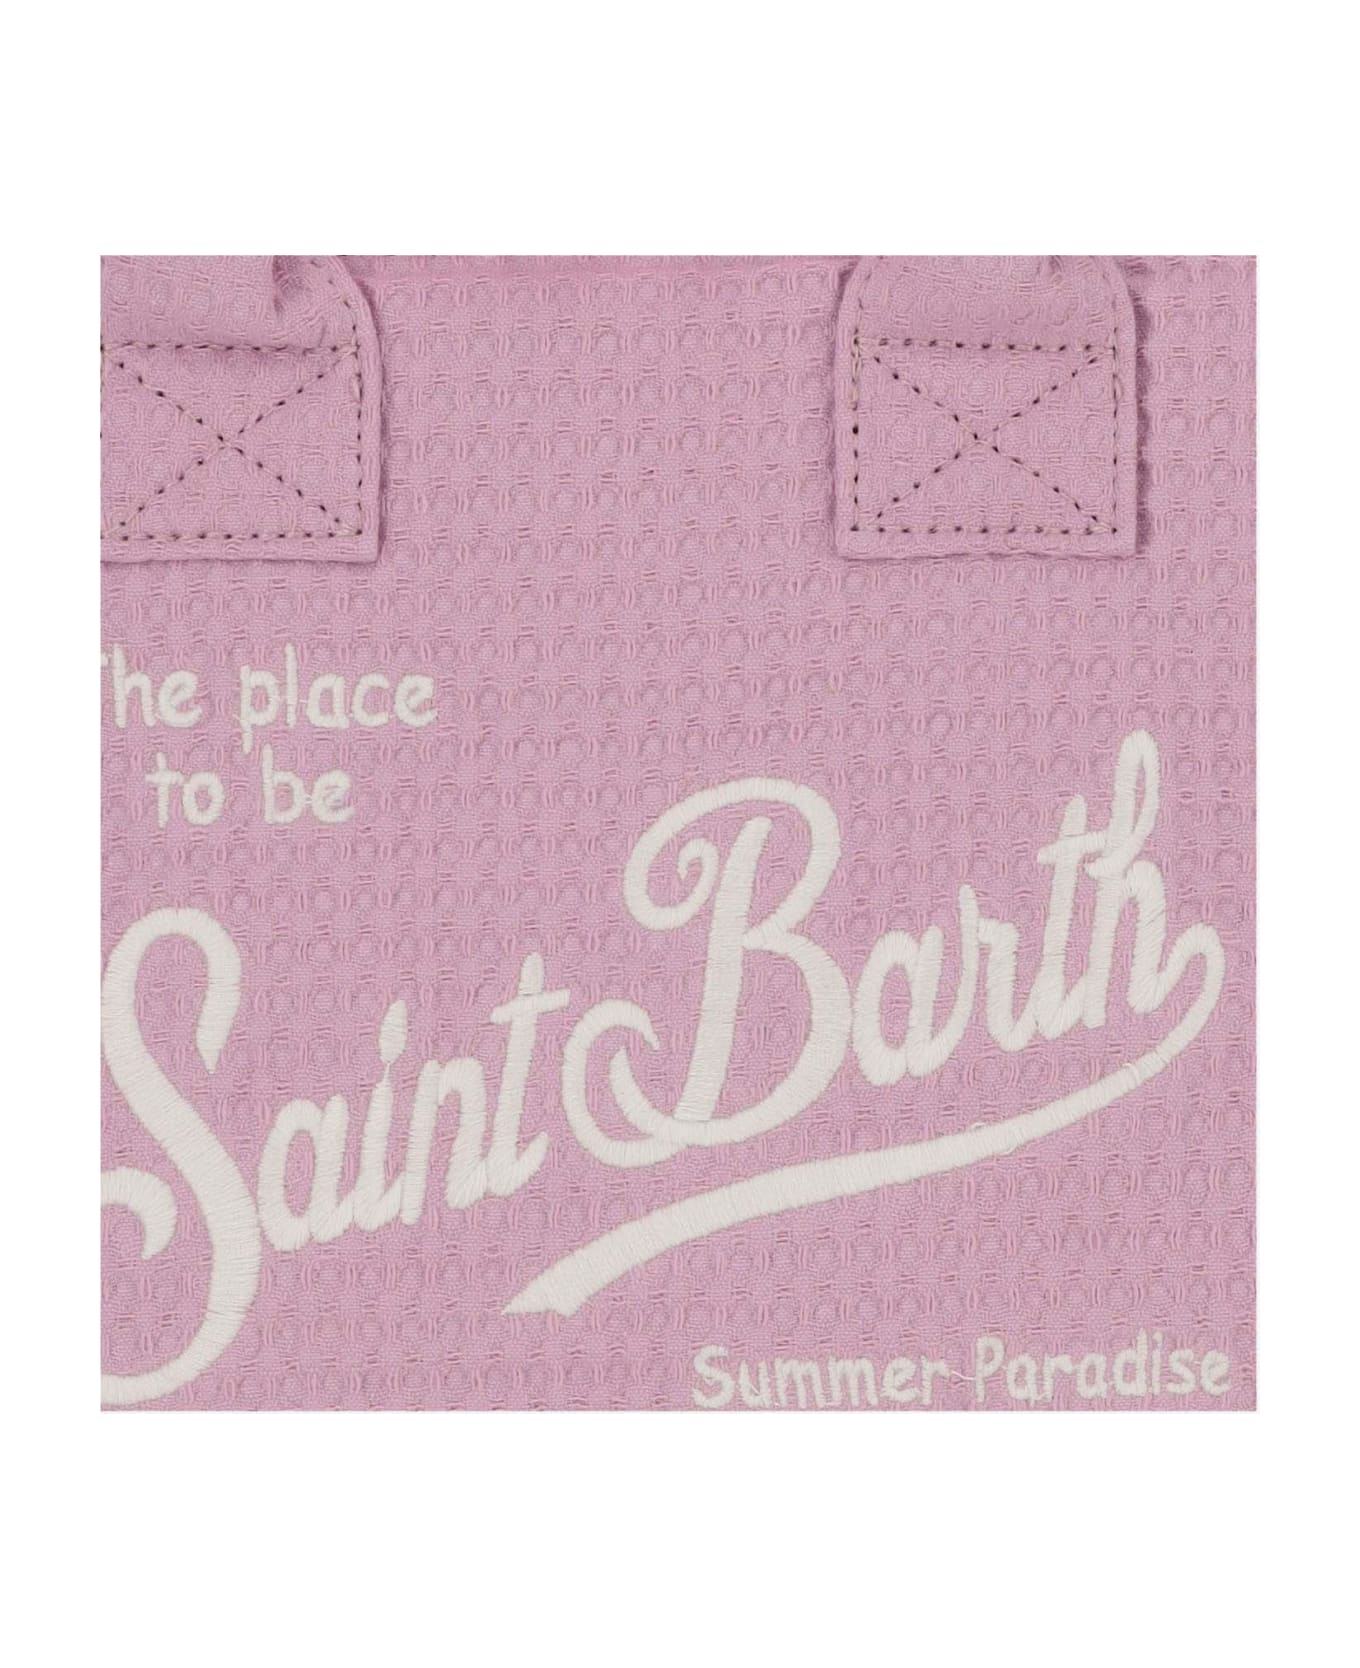 MC2 Saint Barth Colette Tote Bag With Logo - Pink トートバッグ